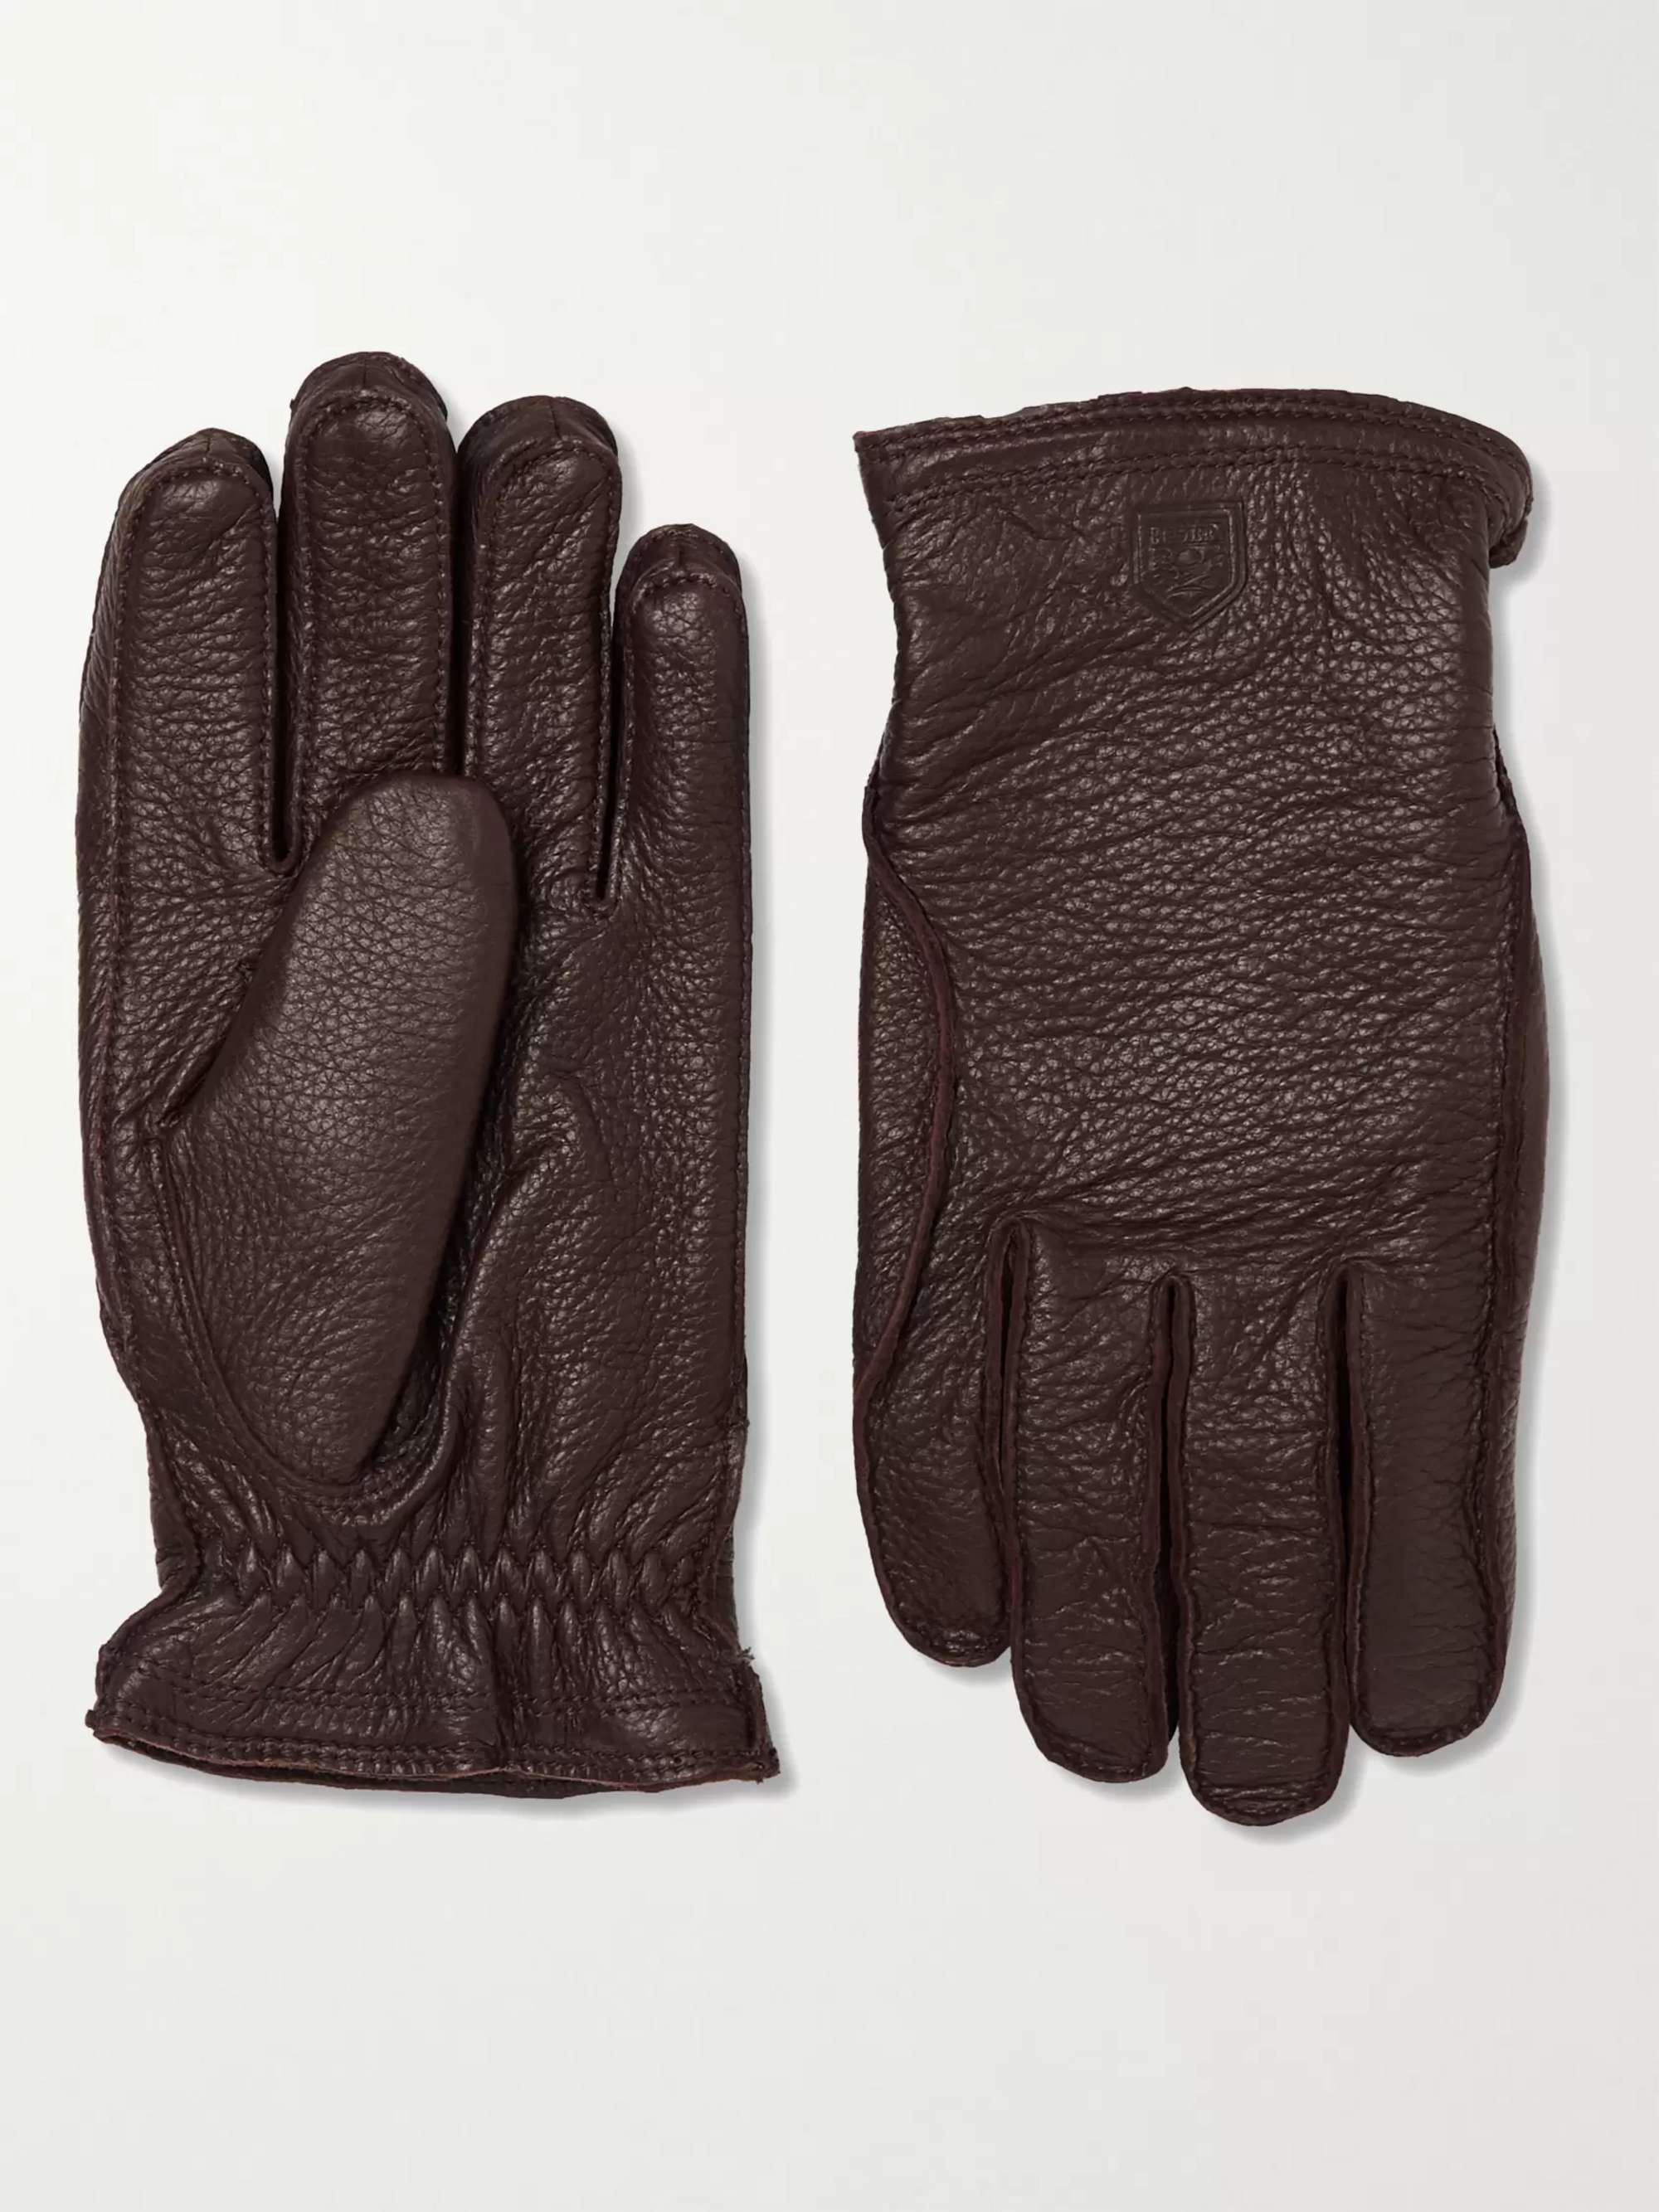 HESTRA Frode Wool-Lined Full-Grain Leather Gloves